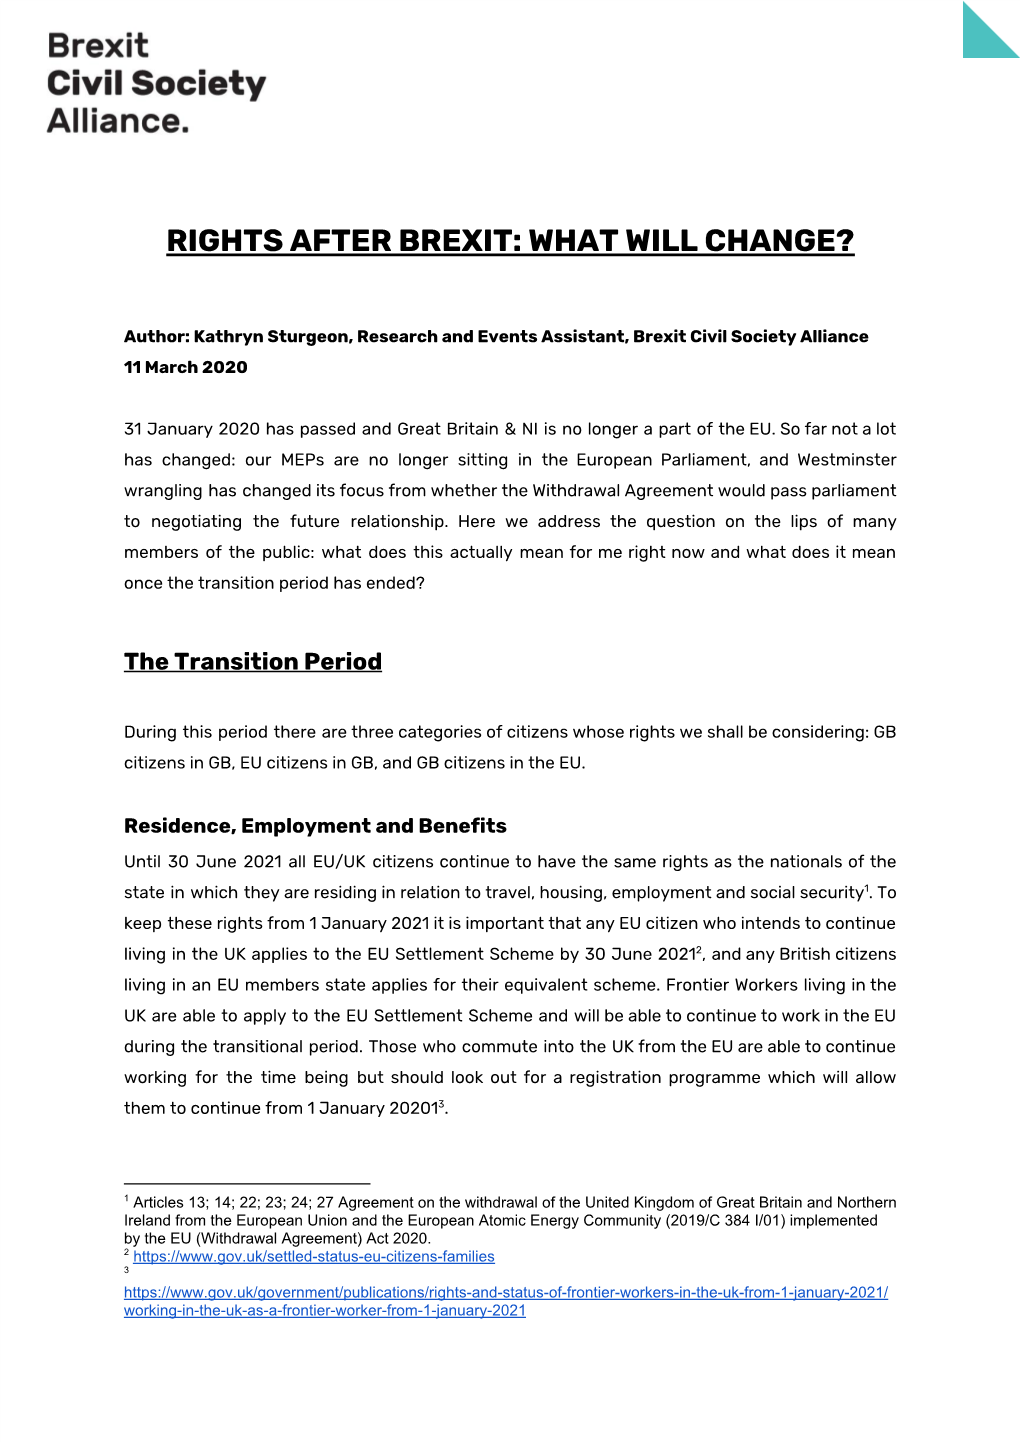 Rights After Brexit: What Will Change?